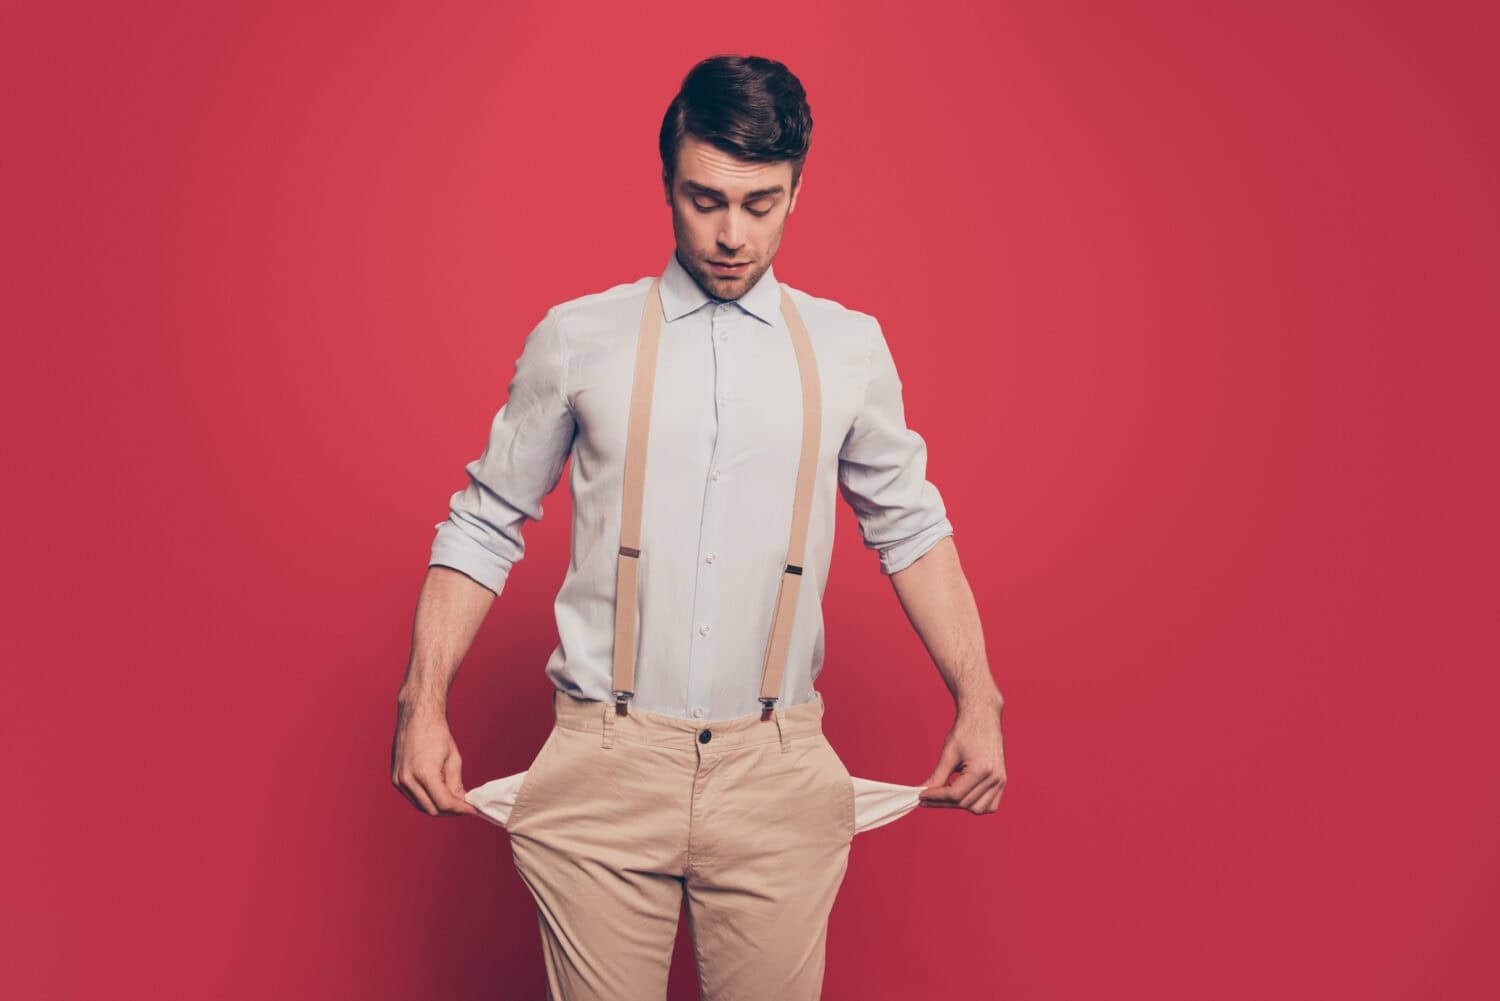 Professional, cunning magician, illusionist, gambler in casual outfit, showing two empty pockets out, standing over red background, looking down